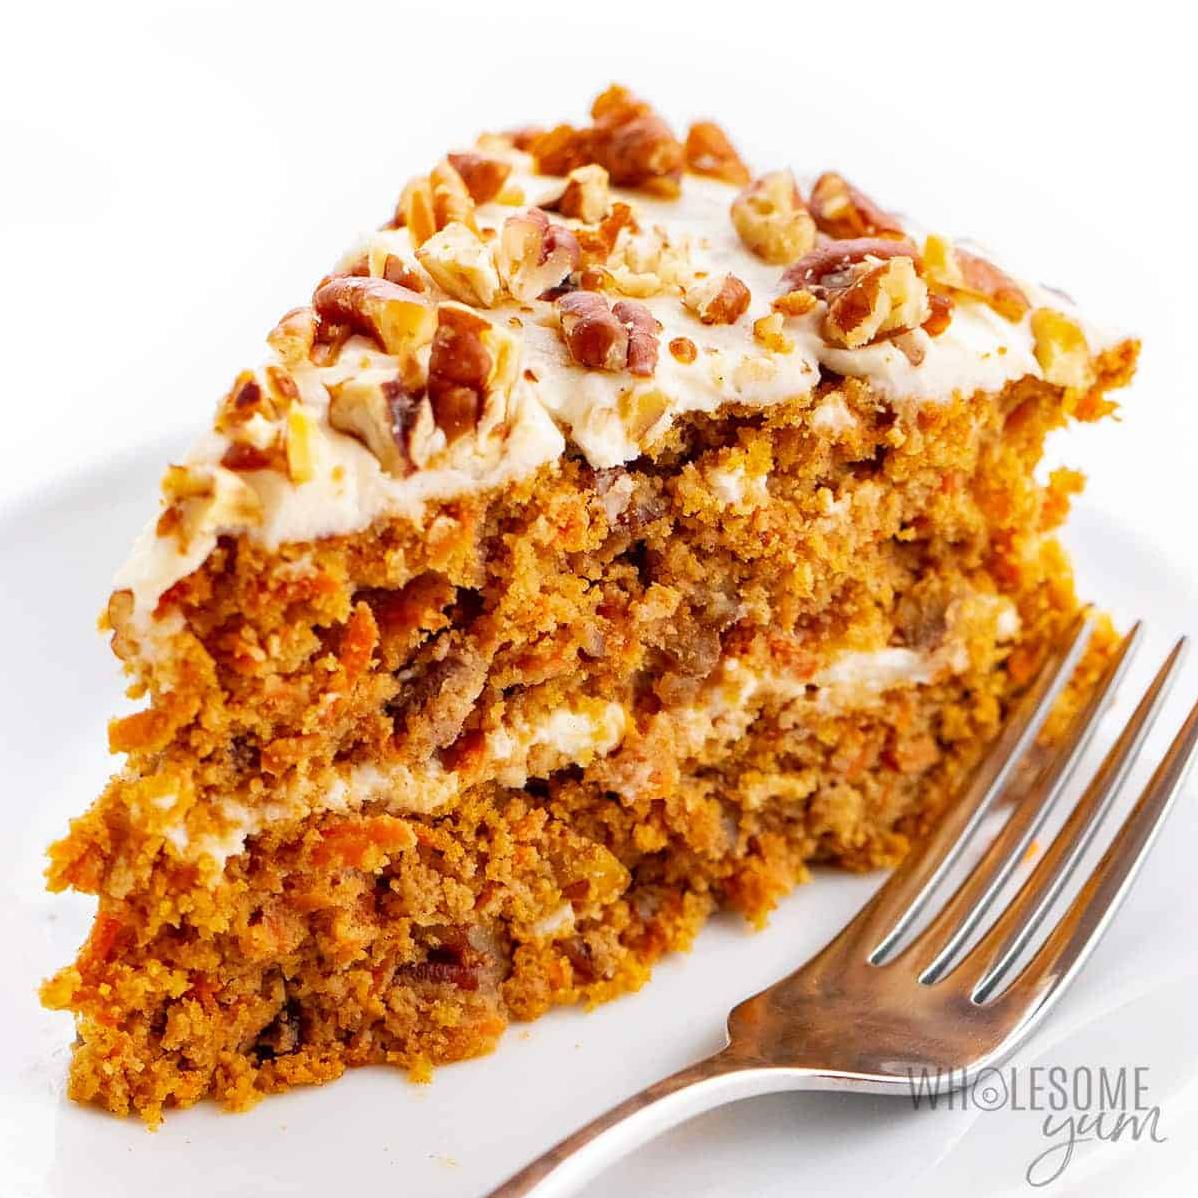  Elevate your afternoon tea with a slice of this healthy carrot cake.